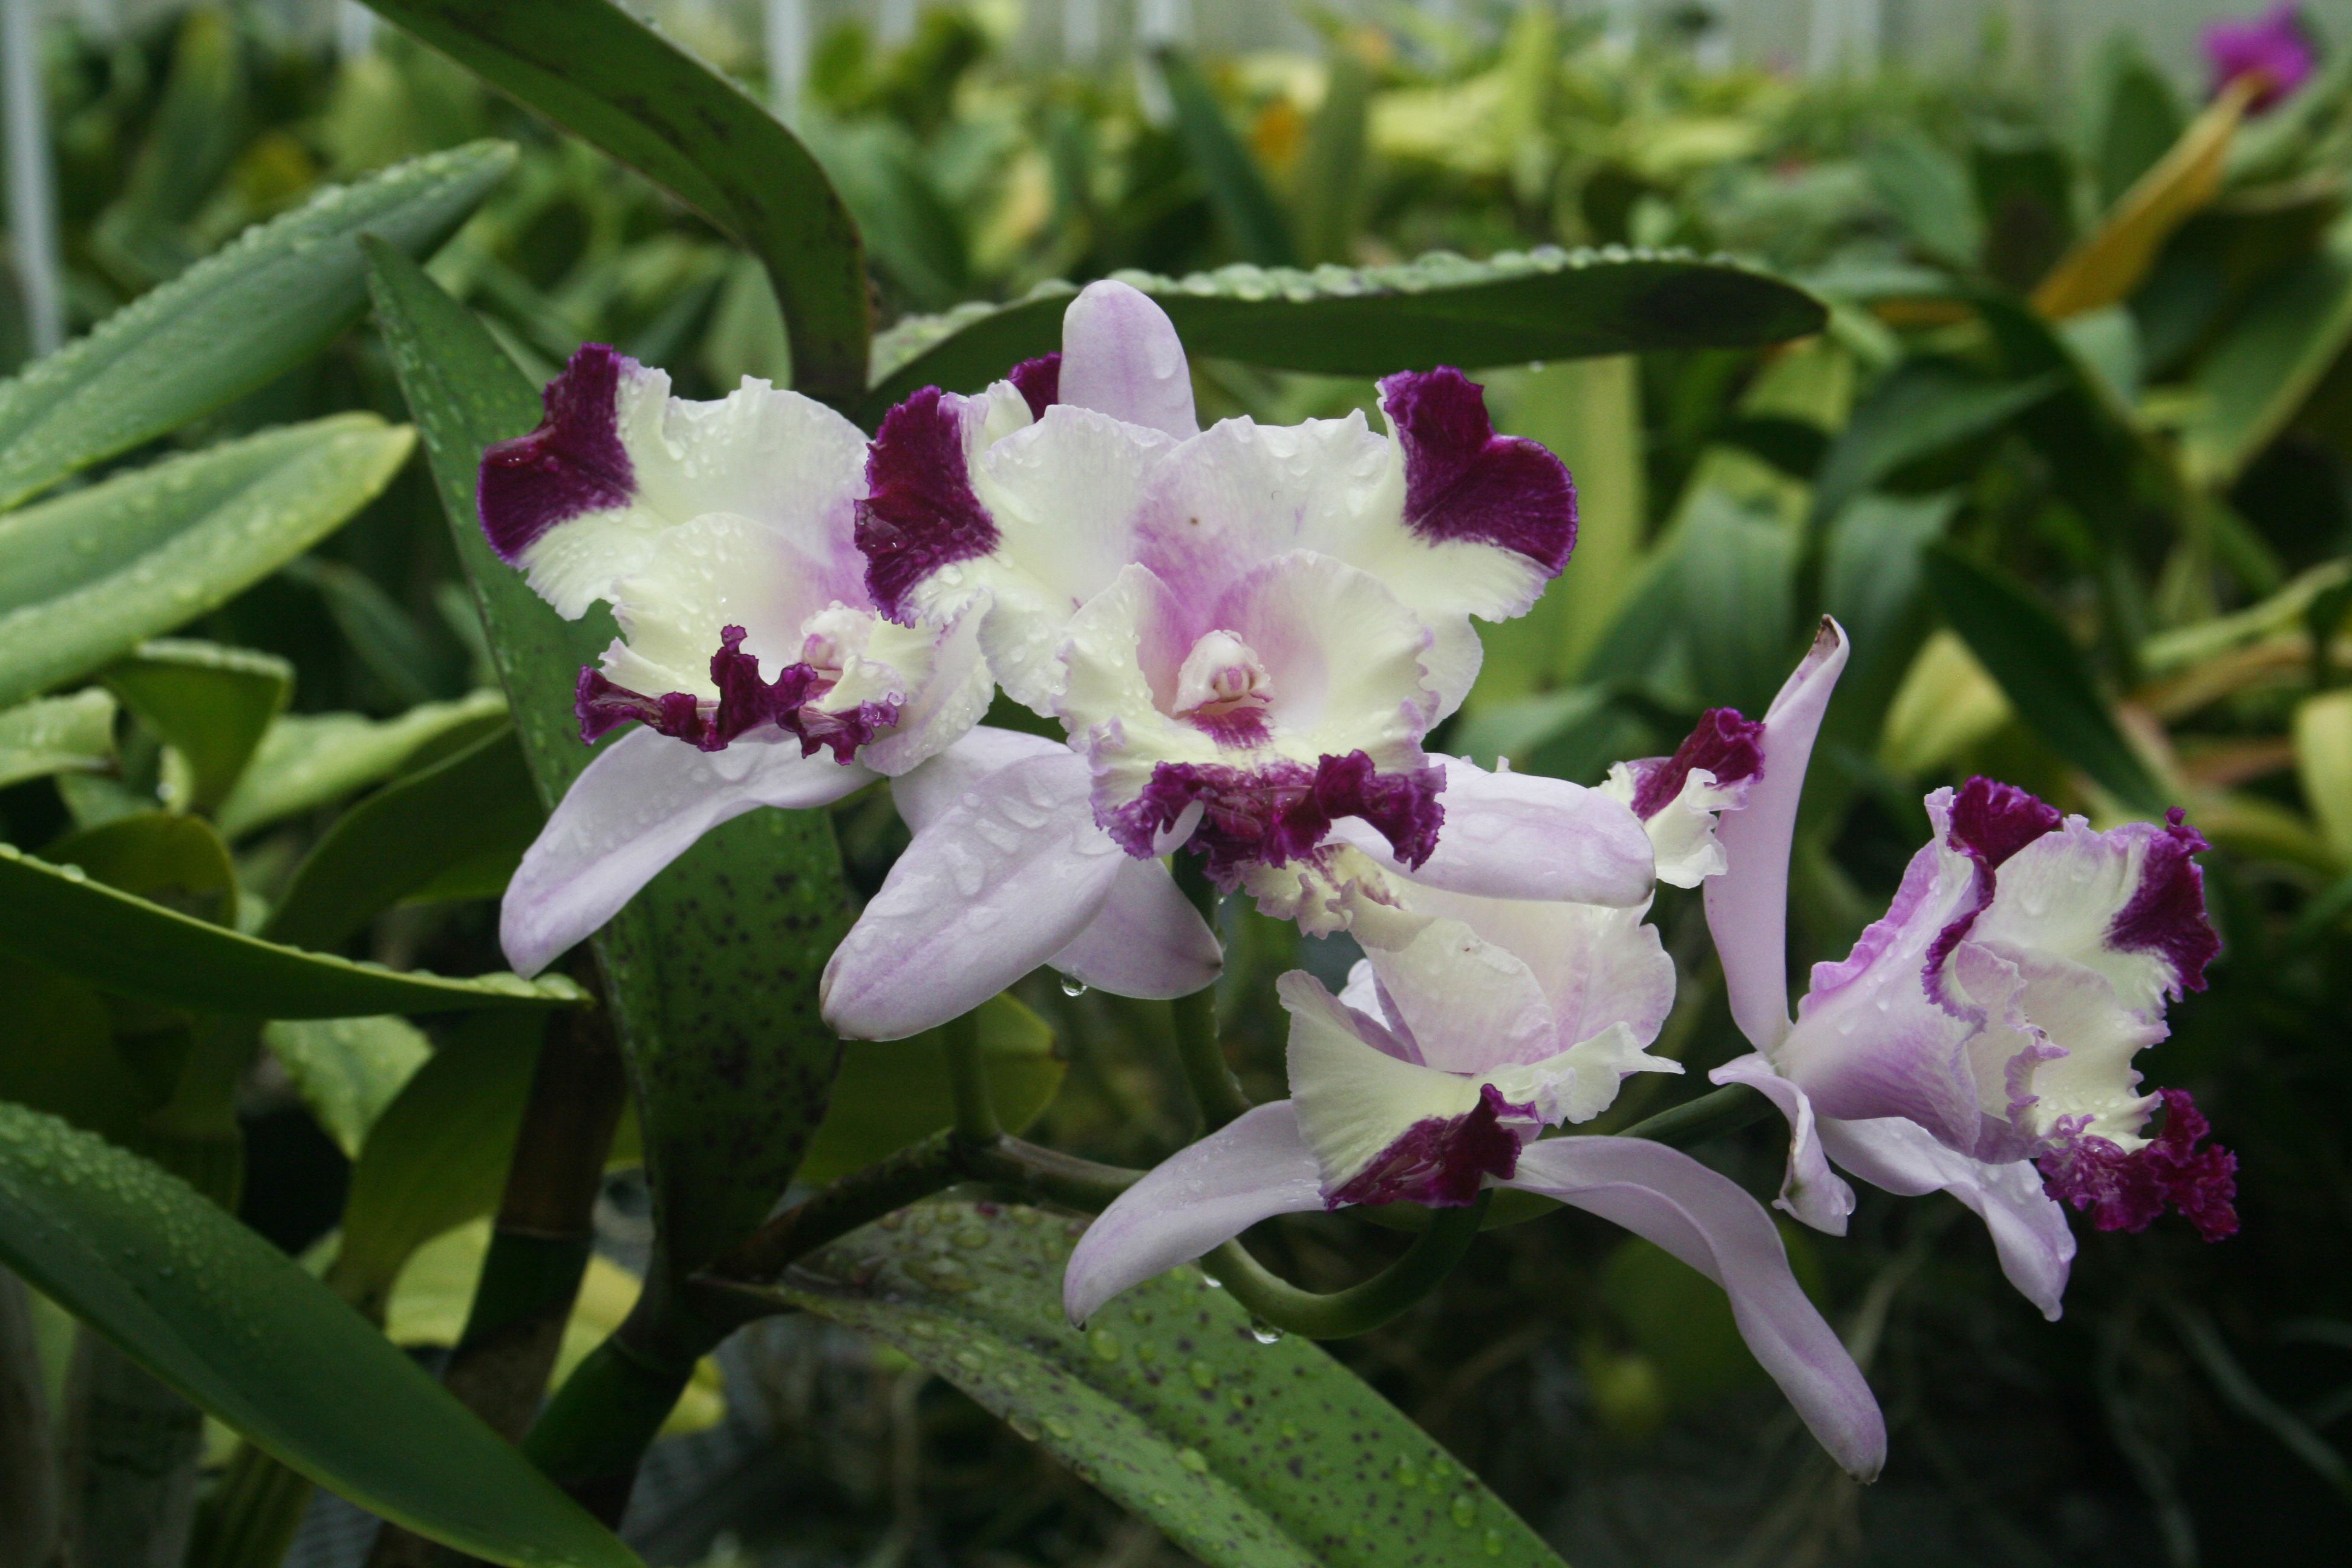 Top 10 Orchid Flower Plants - Types, Uses, And Maintenance – Plantlane